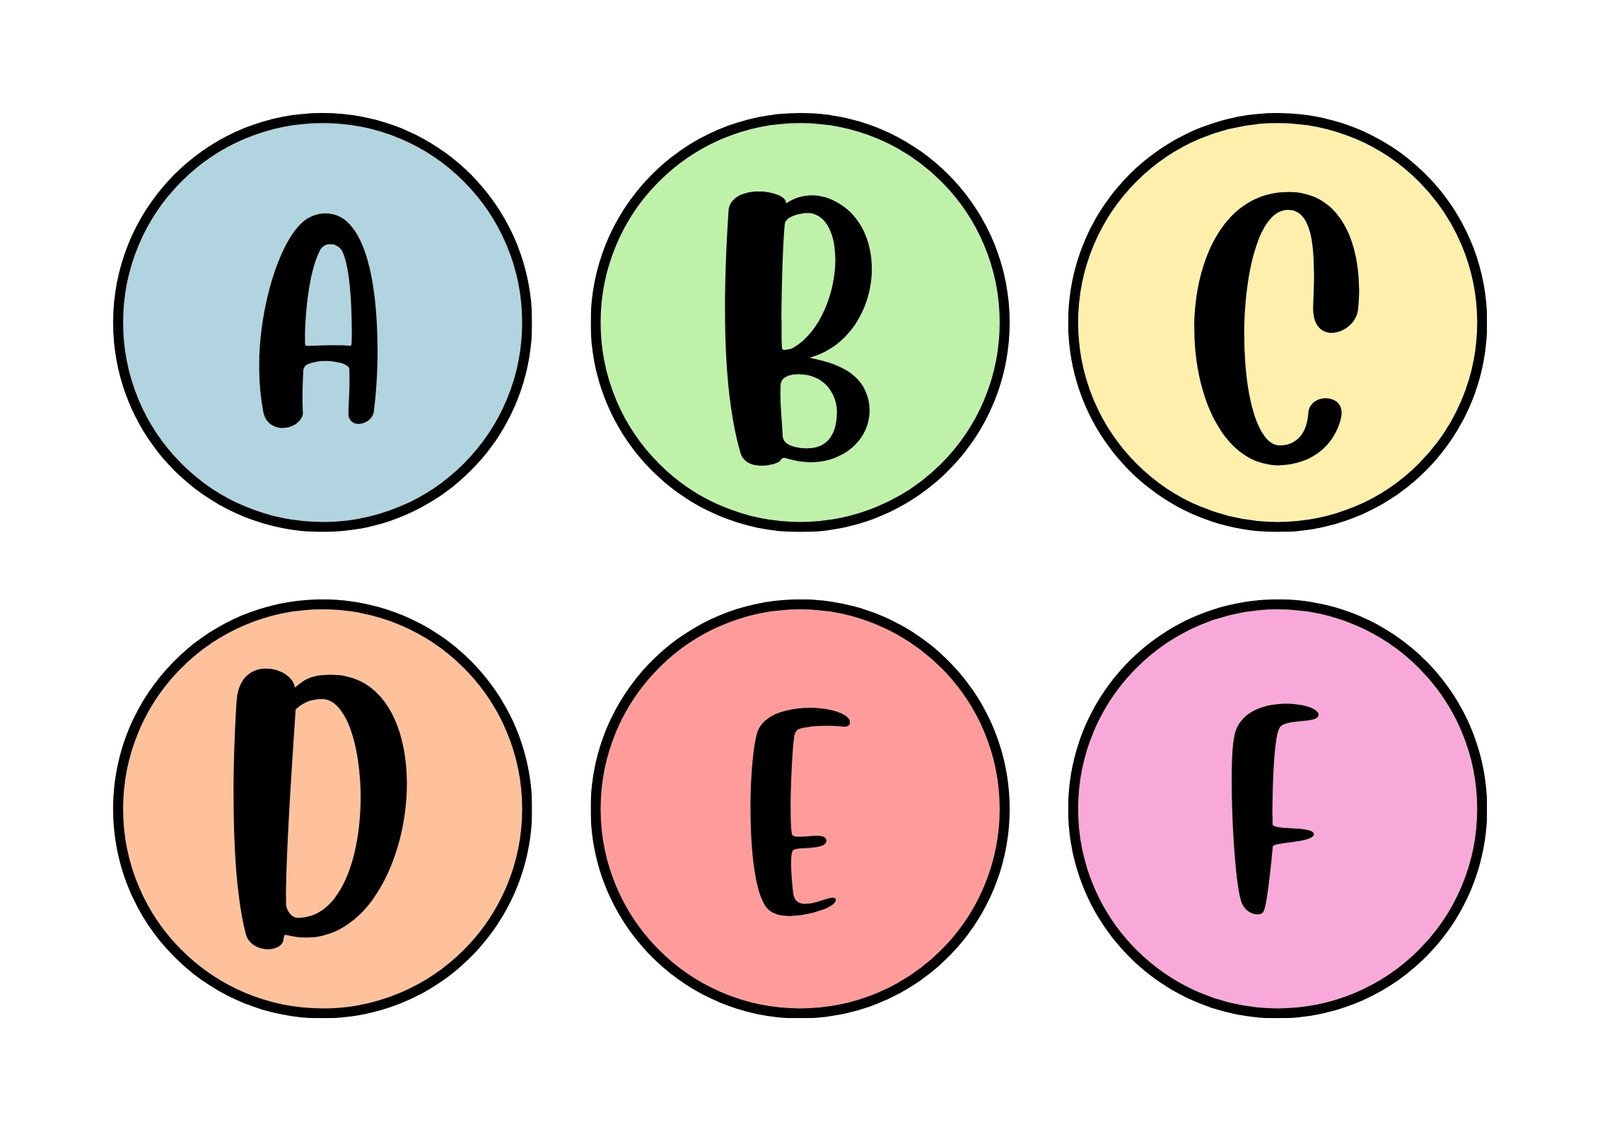 Free Customizable Alphabet Flashcard Templates | Canva in Free Printable Colored Letters of the Alphabet